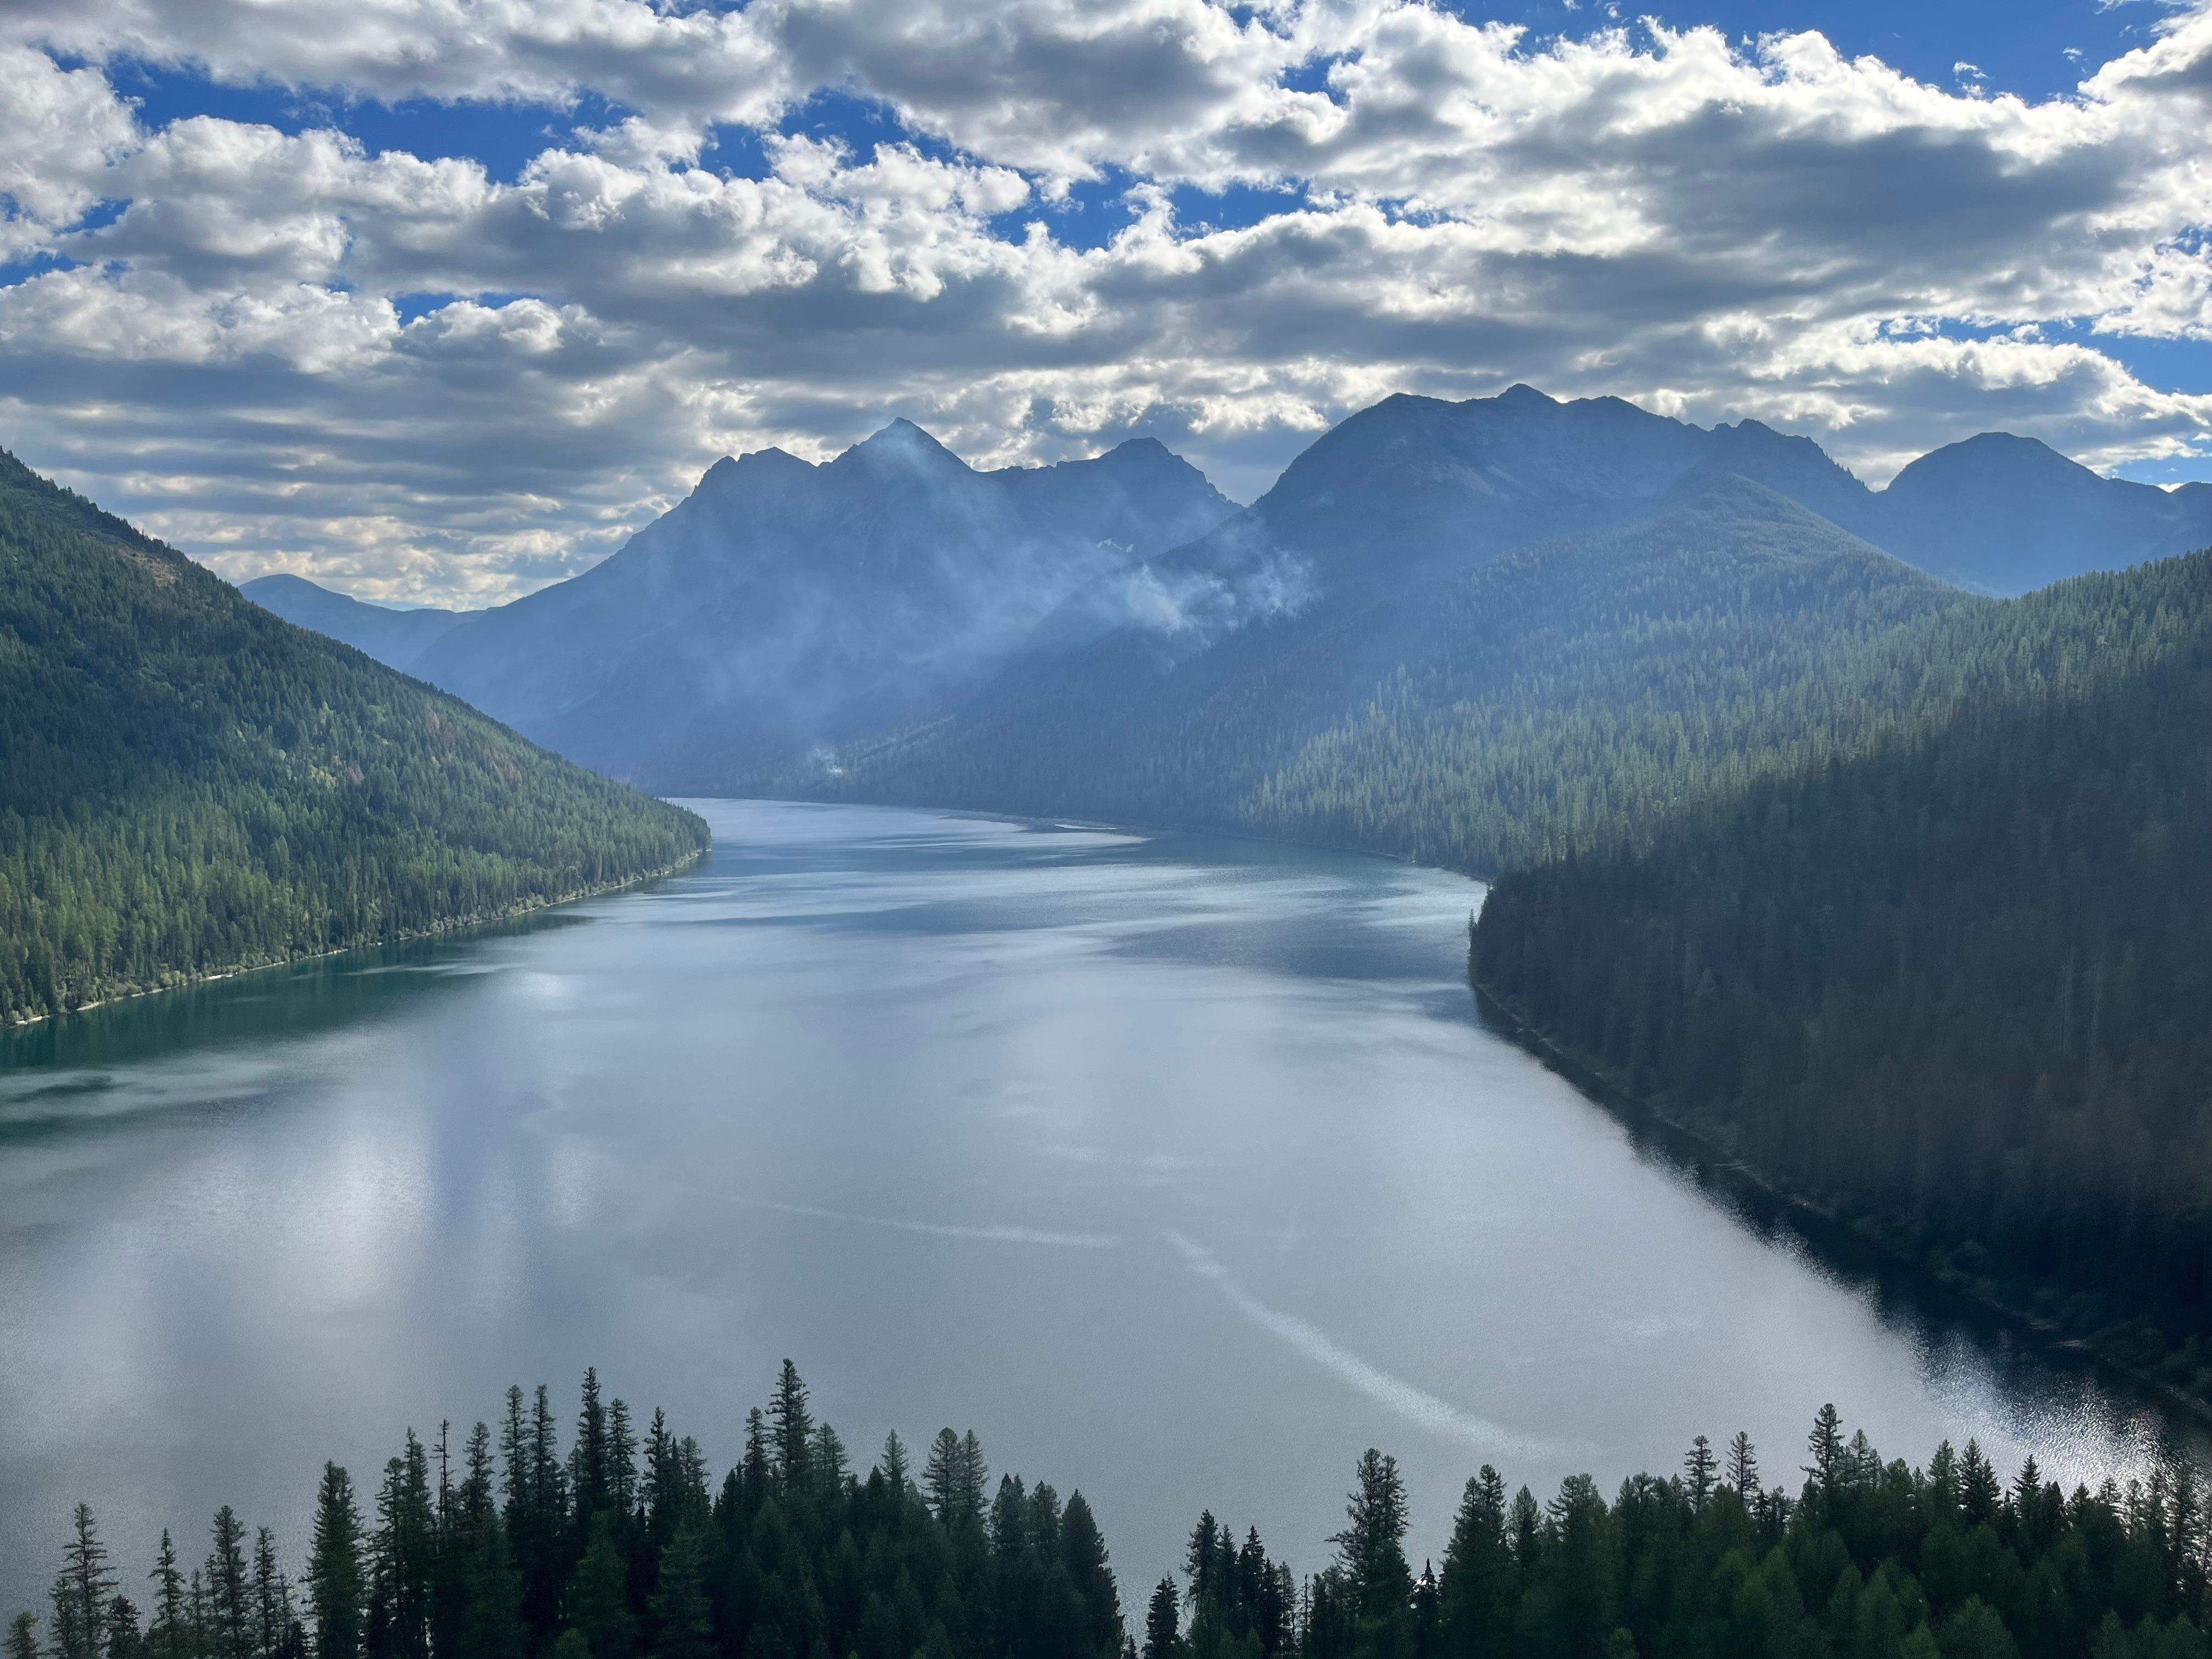 A long lake surrounded by mountains with white wisps of smoke coming from the forest on the right side of the lake